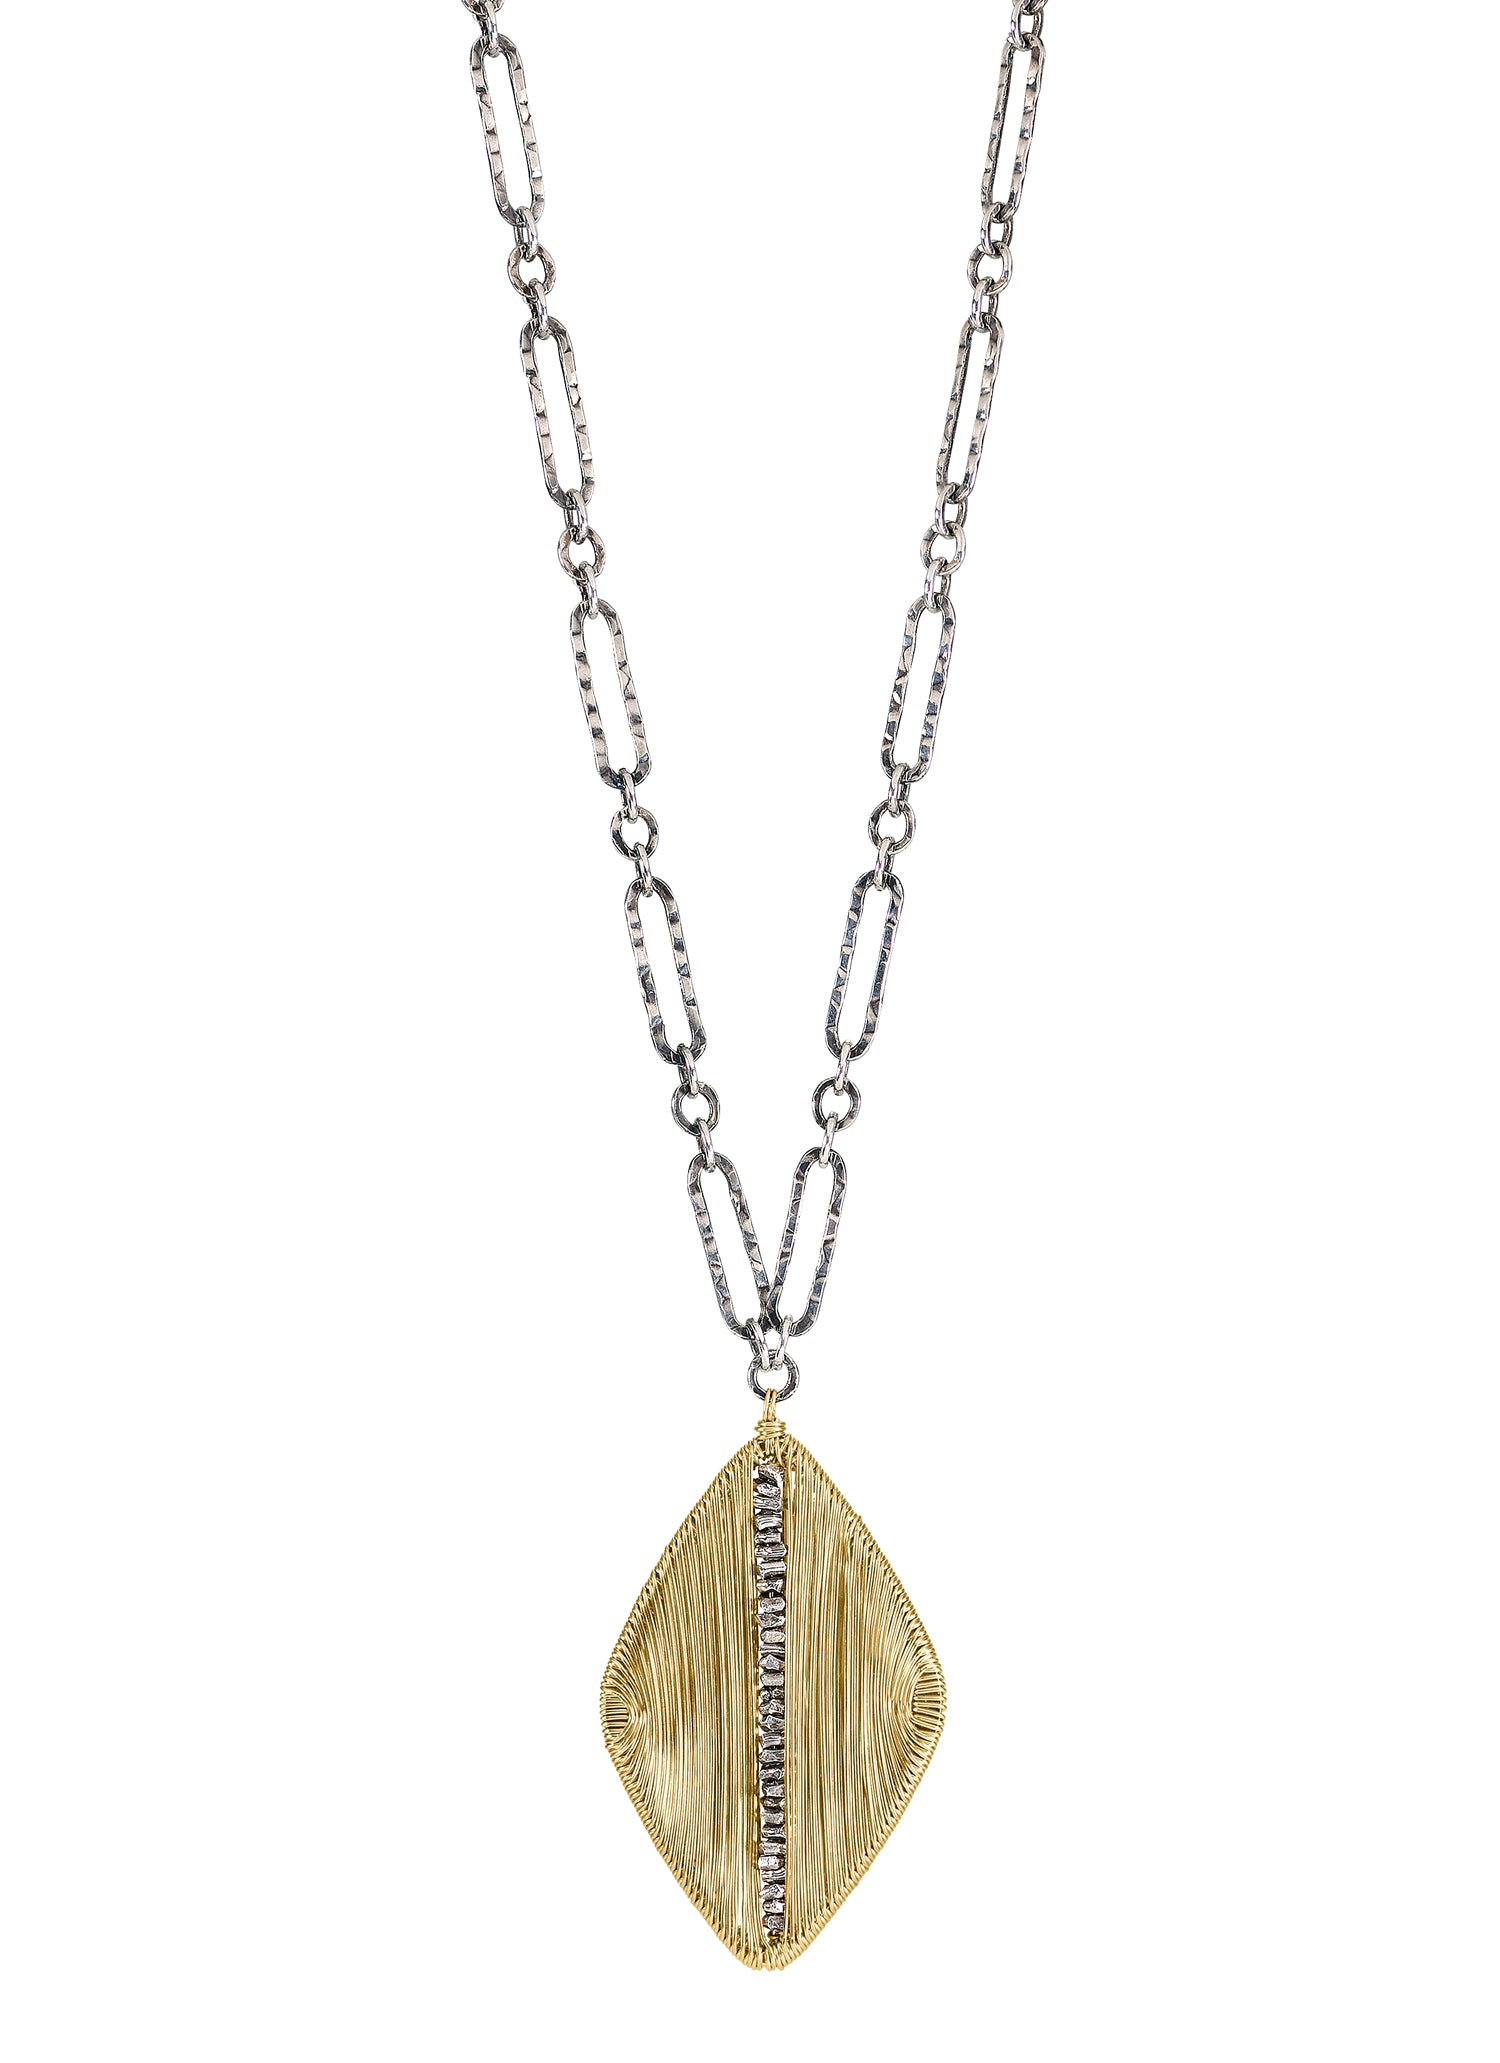 14k gold fill Sterling silver Mixed metal Necklace measures 18" in length Pendant measures 1-1/4" in length and 13/16" in width Handmade in our Los Angeles studio